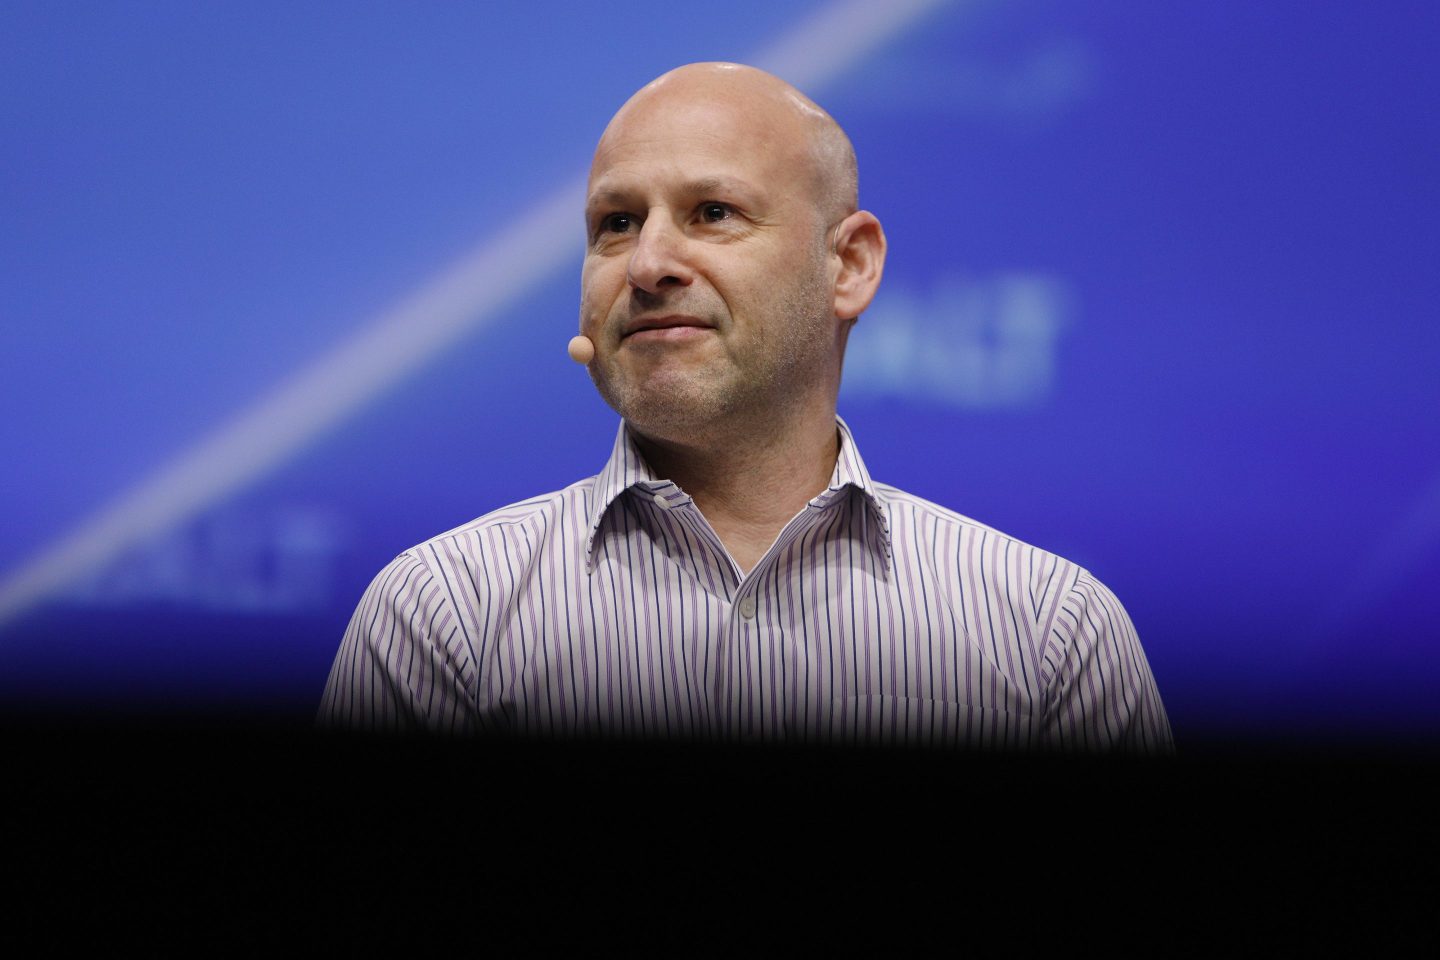 Joseph Lubin, CEO and founder of Consensys